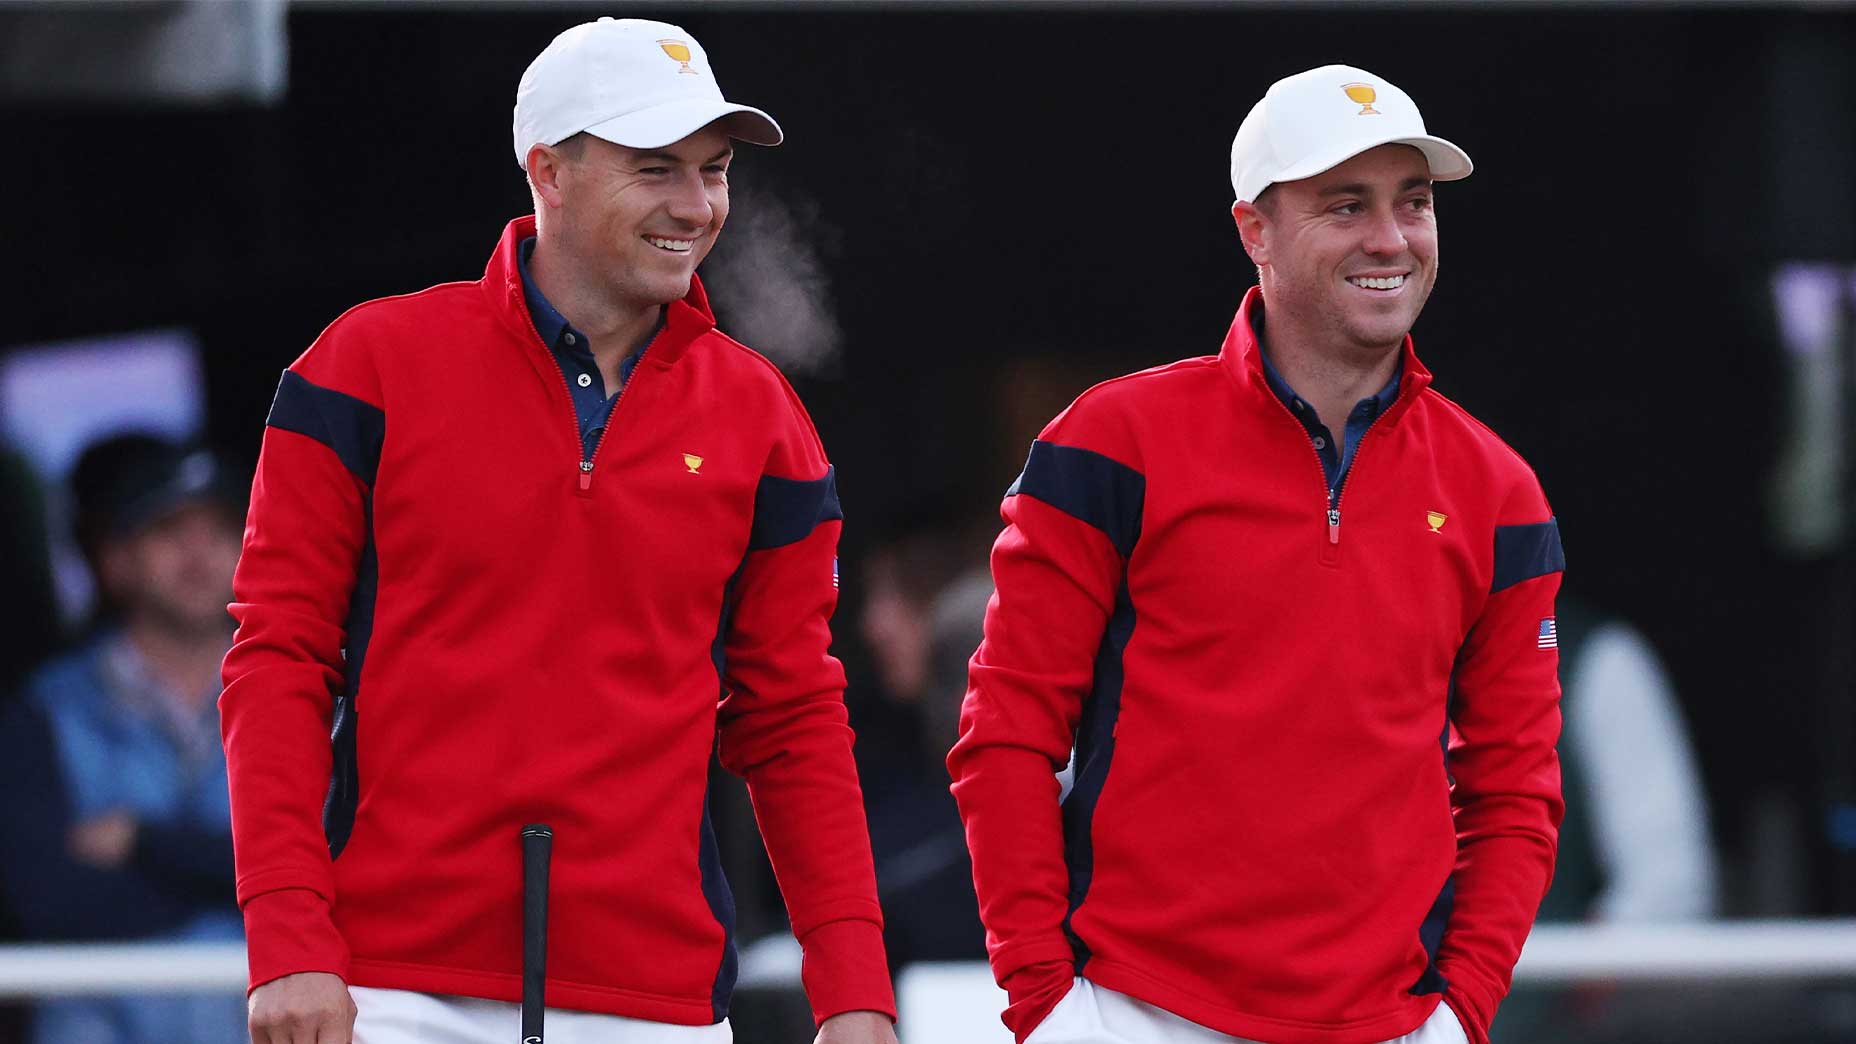 justin thomas and jordan spieth at the presidents cup